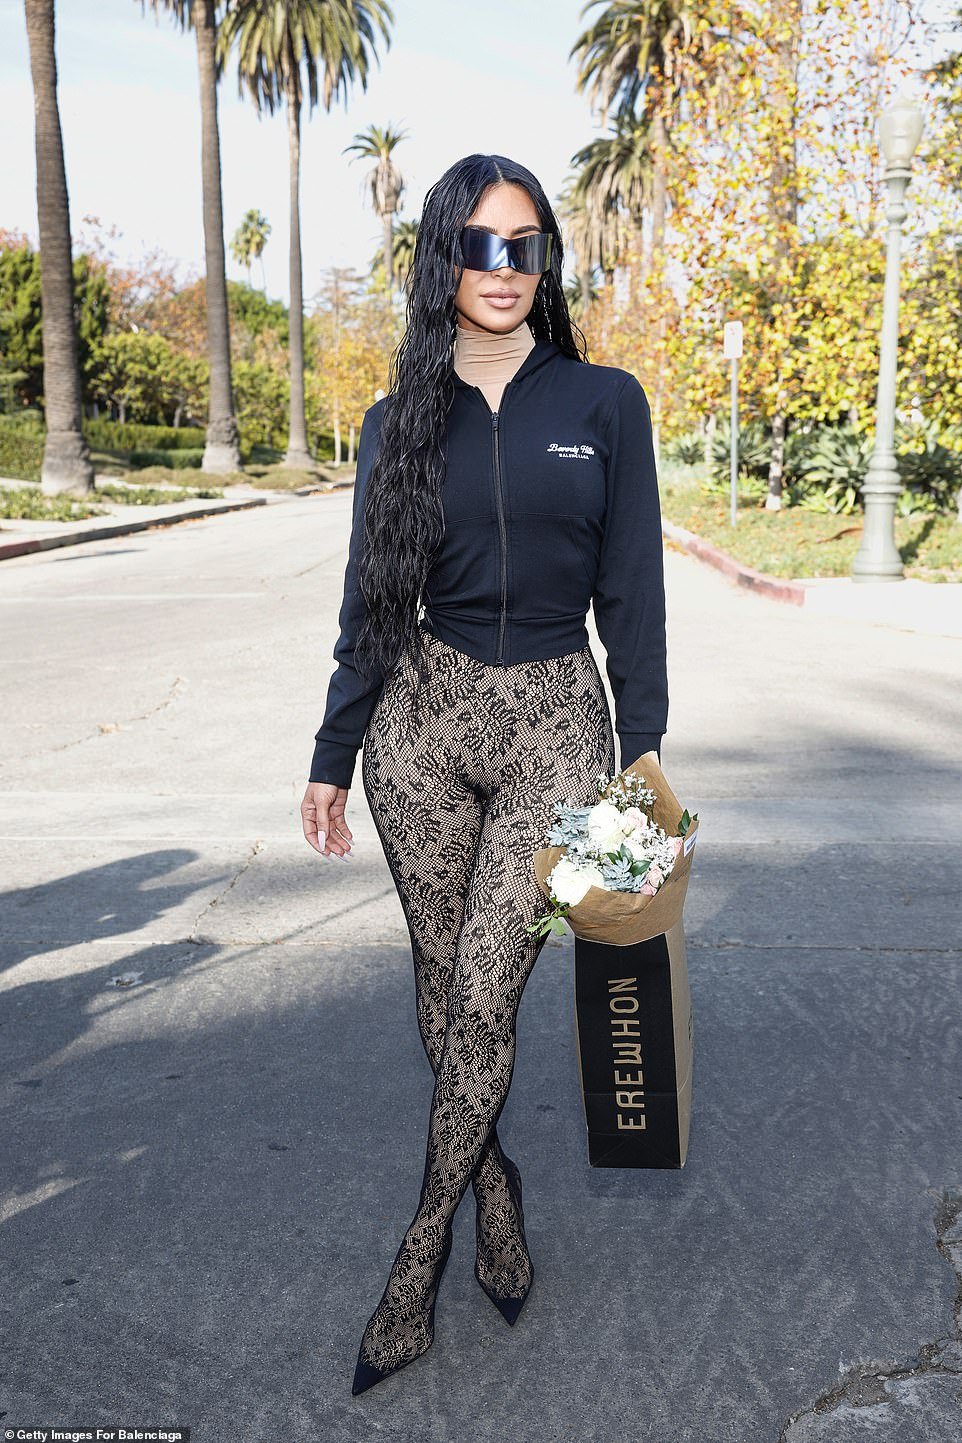 The reality TV star, 42, sizzled in a pair of skintight nude lace leggings that showed off her famous hourglass curves, and featured built-in heels